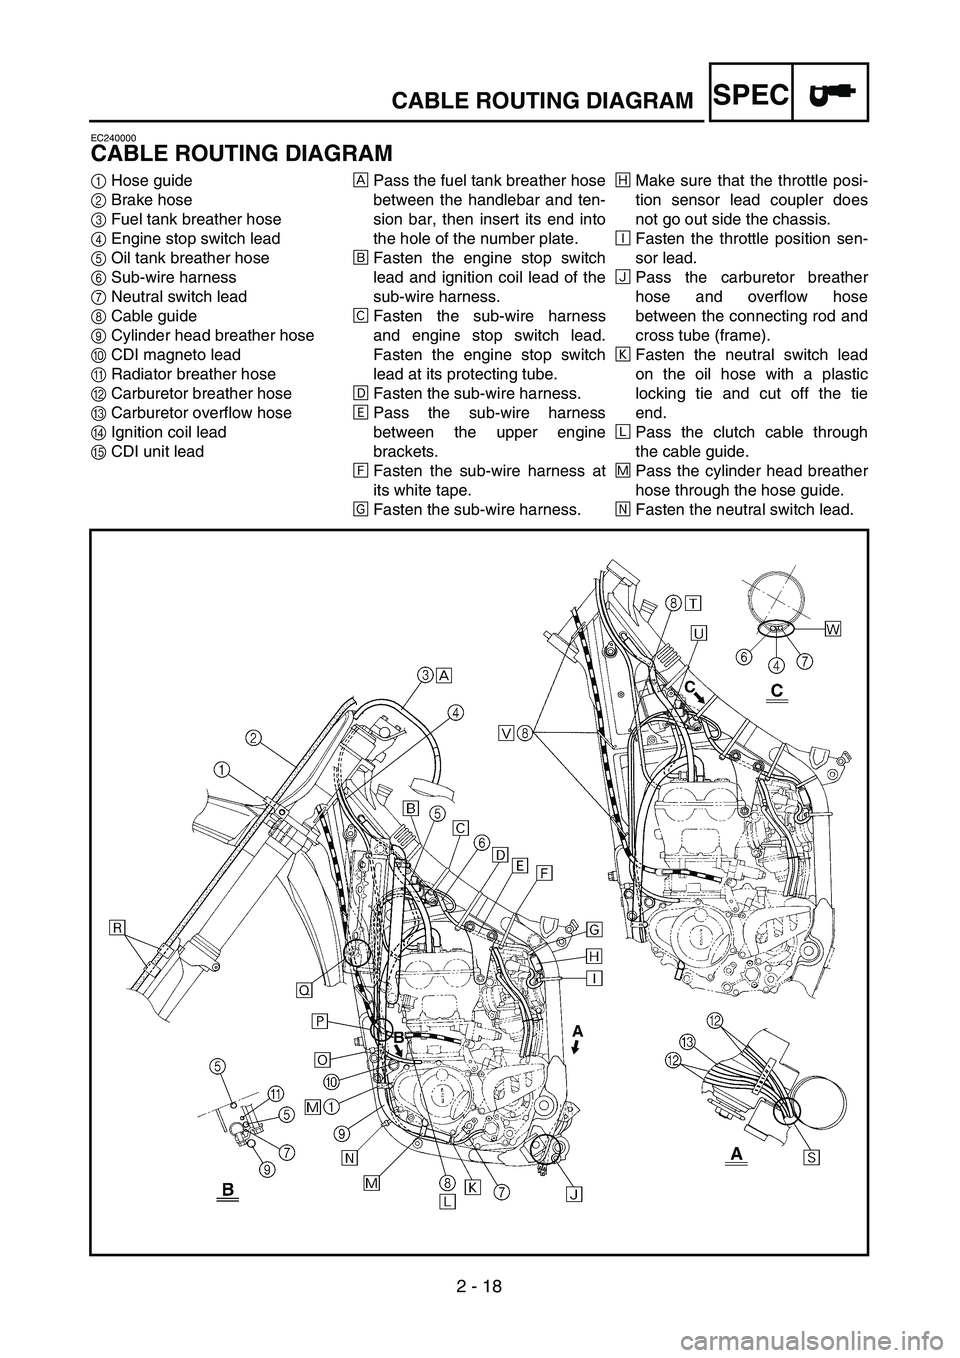 YAMAHA YZ250F 2002  Notices Demploi (in French)  
2 - 18
SPEC
 
CABLE ROUTING DIAGRAM 
EC240000 
CABLE ROUTING DIAGRAM 
1  
Hose guide  
2  
Brake hose  
3  
Fuel tank breather hose  
4 
Engine stop switch lead  
5 
Oil tank breather hose 
6 
Sub-w